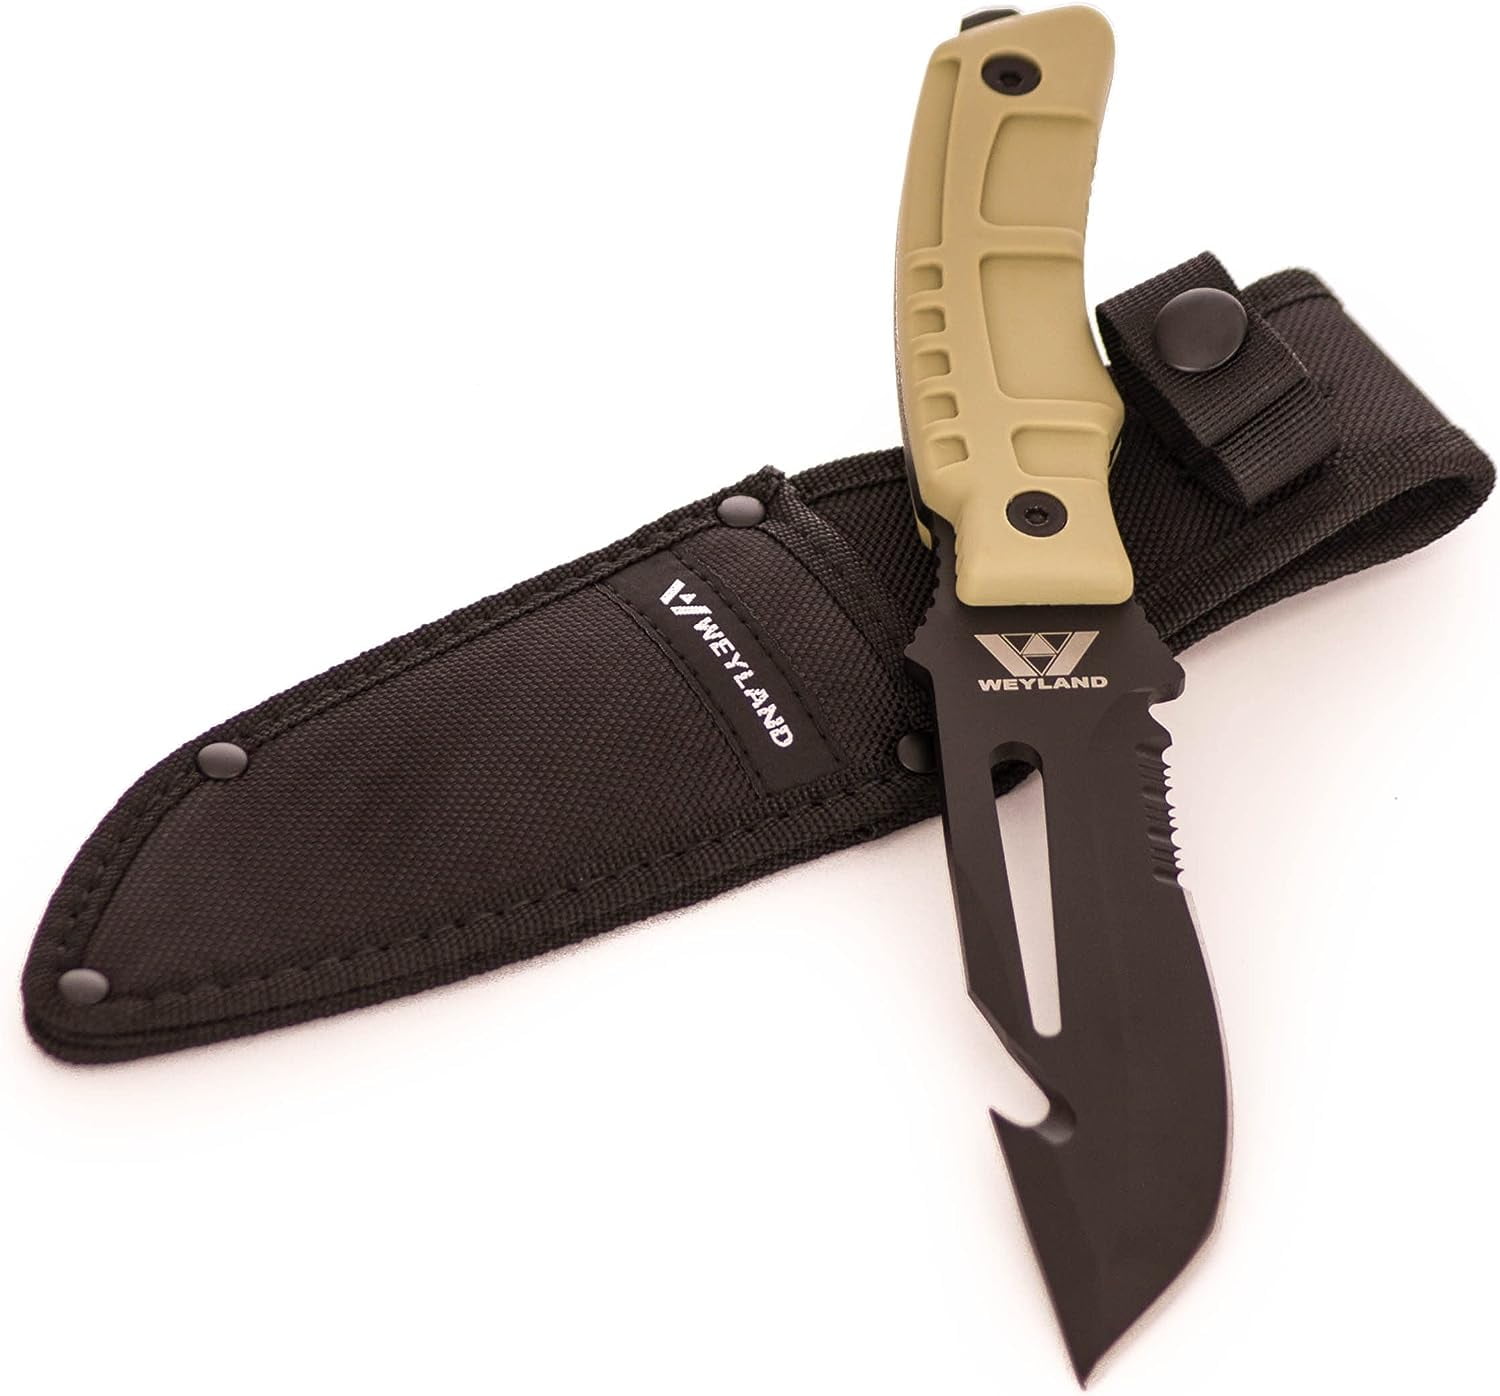  WEYLAND EDC Fixed Blade Tactical Neck Knife With Sheath -  Small Fixed Blade Utility Knife, Boy Scout Carry knife for Everyday Carry  and Hiking : Sports & Outdoors